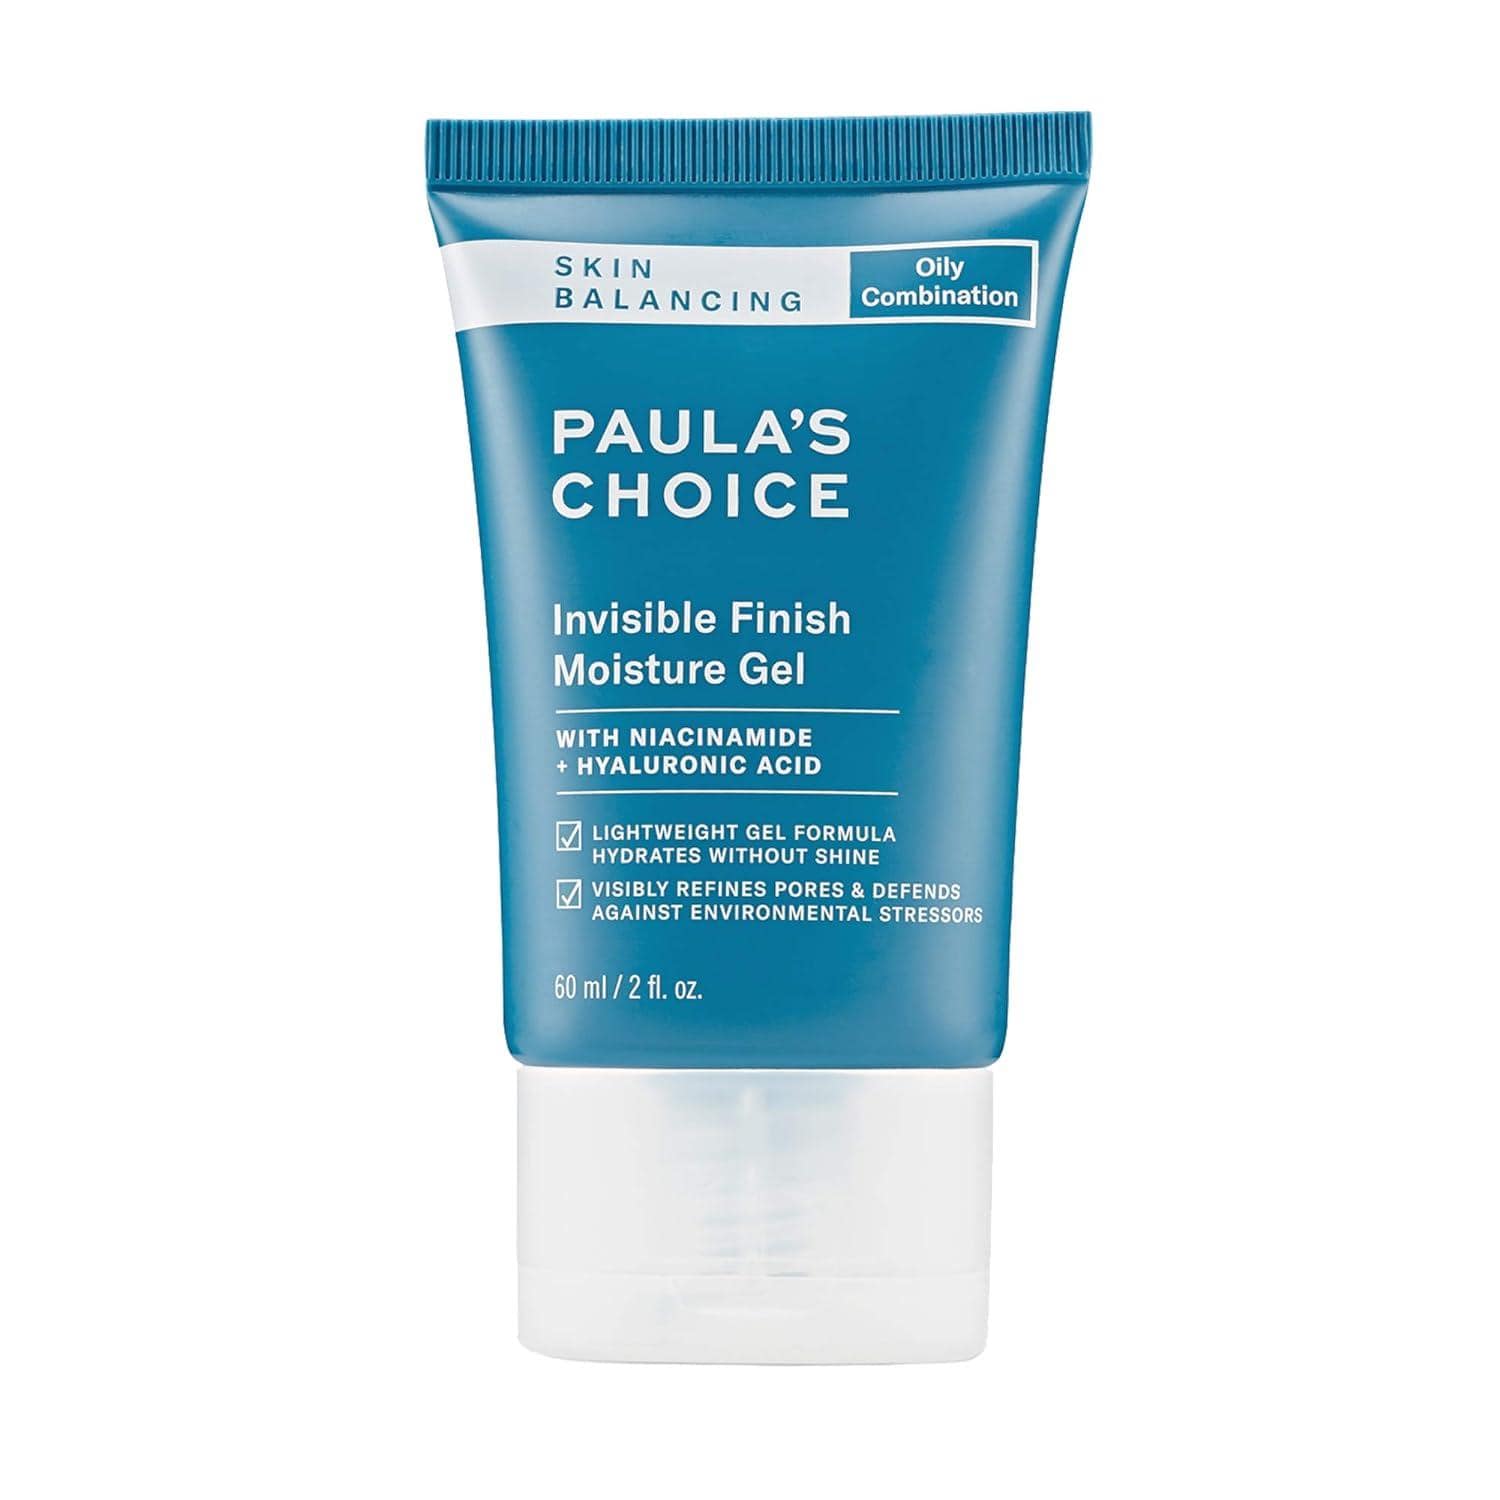 Paula's Choice Skin Balancing Invisible Finish Moisture Gel is my top pick for an Oil-Free Moisturizer, impressing with its gel-like formula that mattifies pores, softens, and smoothens skin tone without feeling heavy.